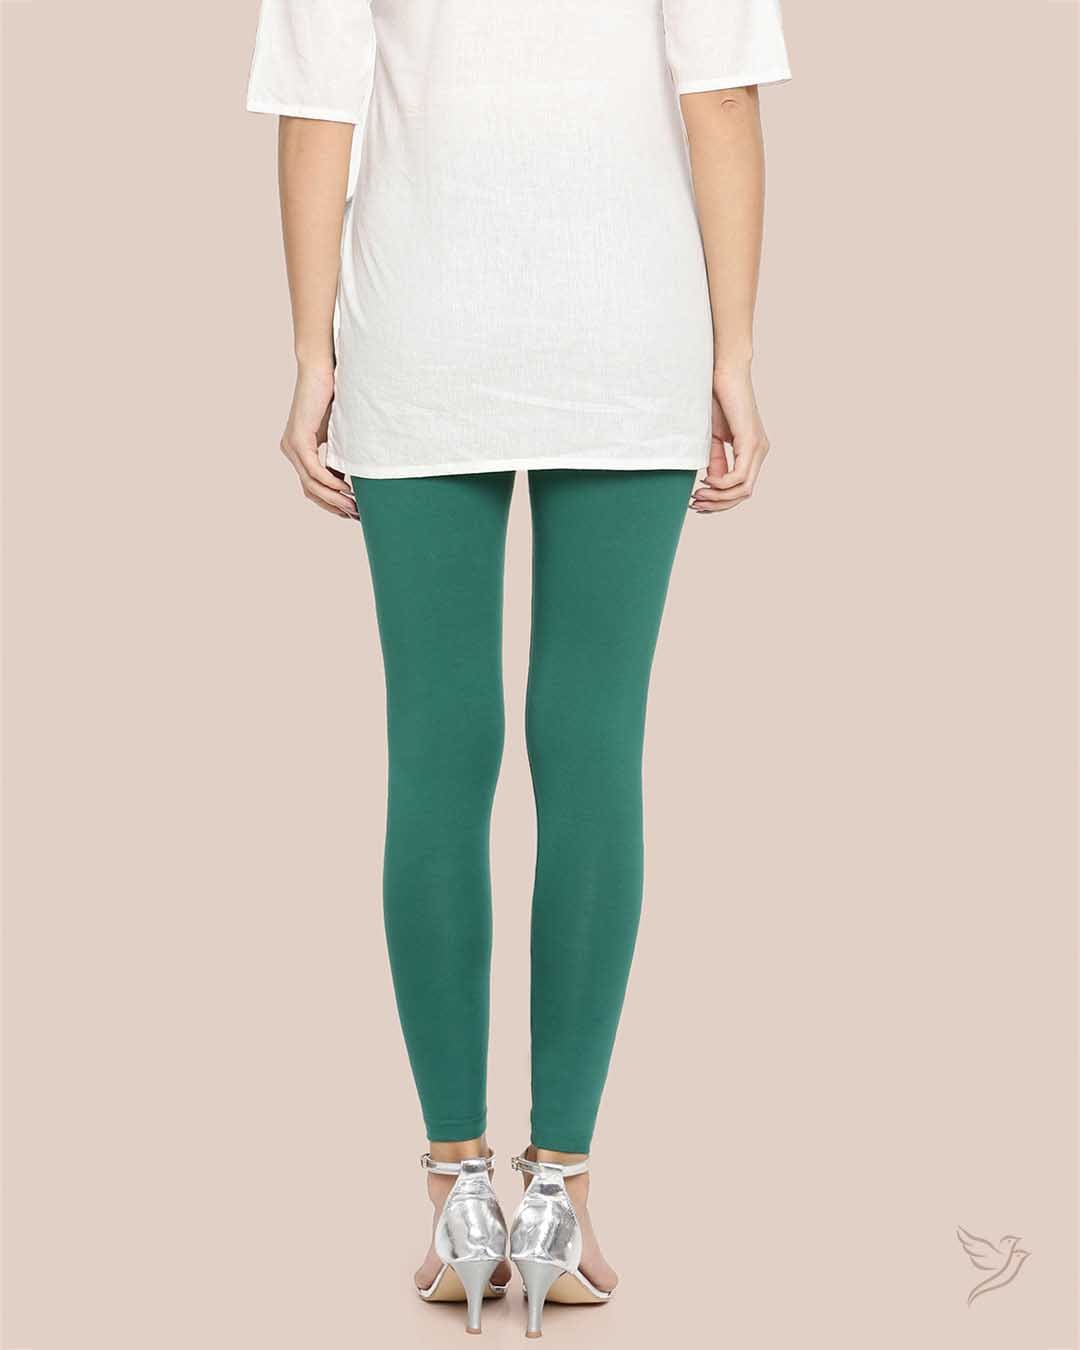 New Leaf Cotton Ankle Legging for College girls